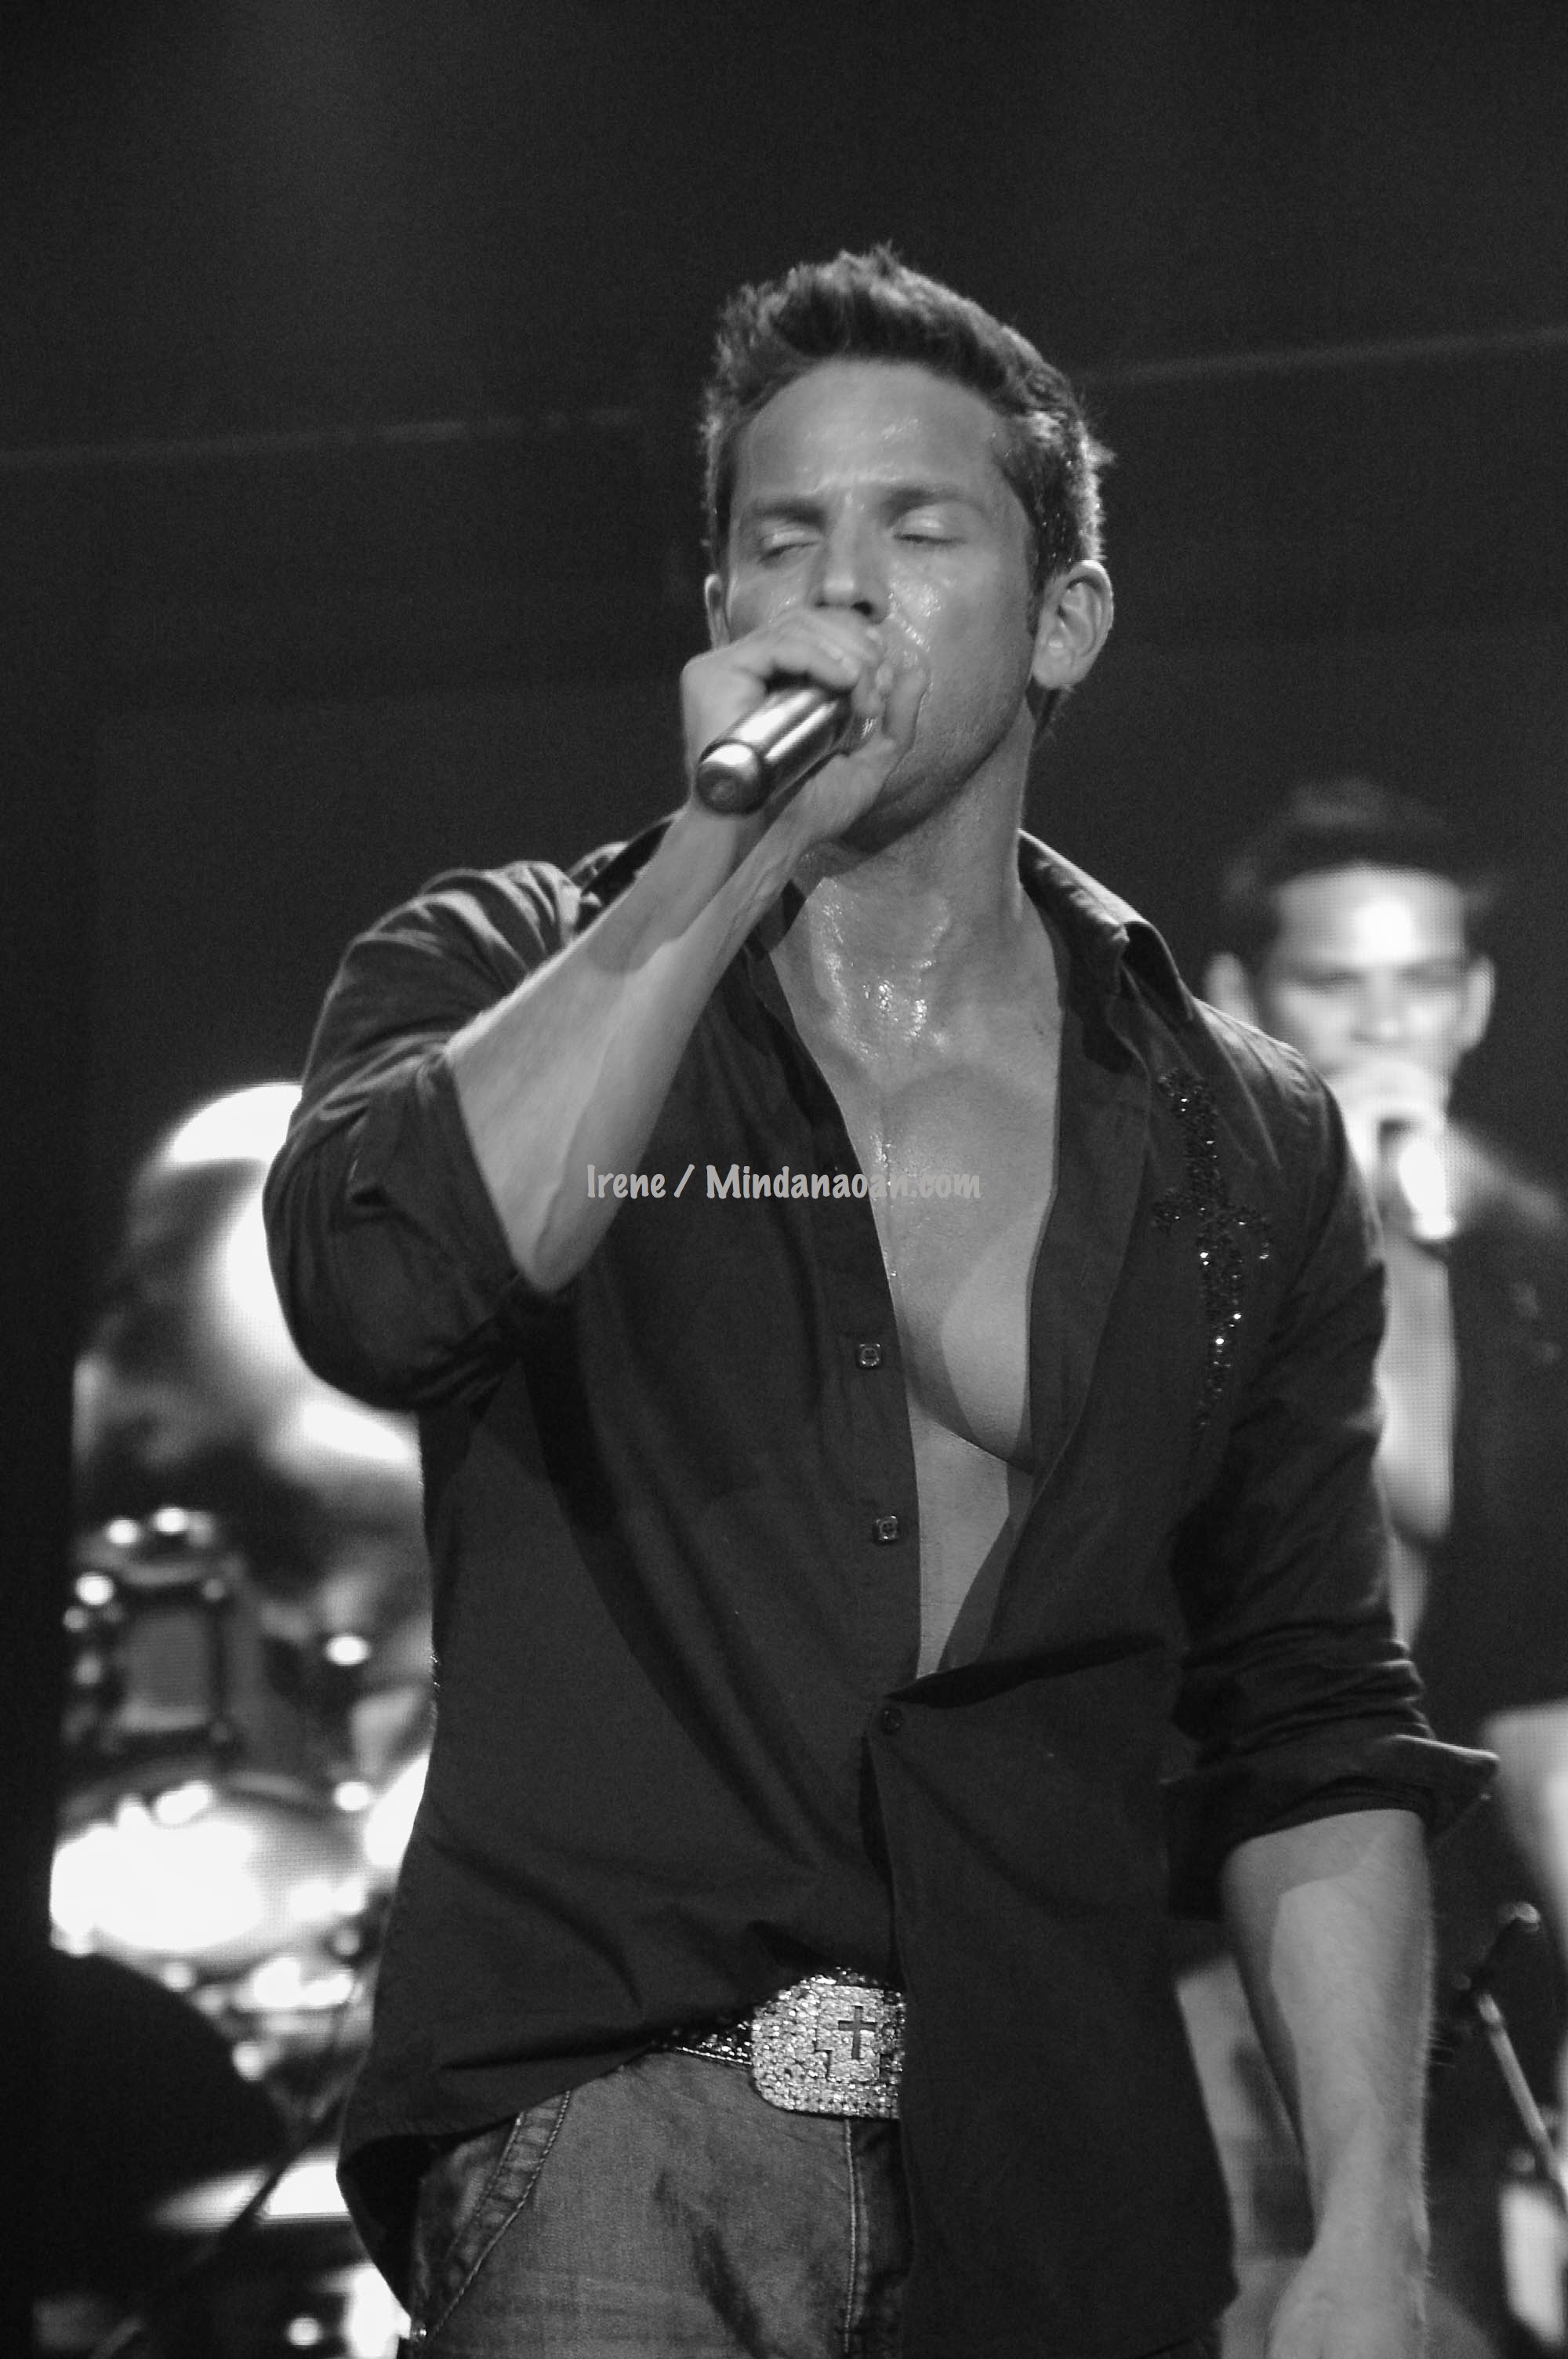 Photos: Jeff Timmons of 98 Degrees Live In Manila